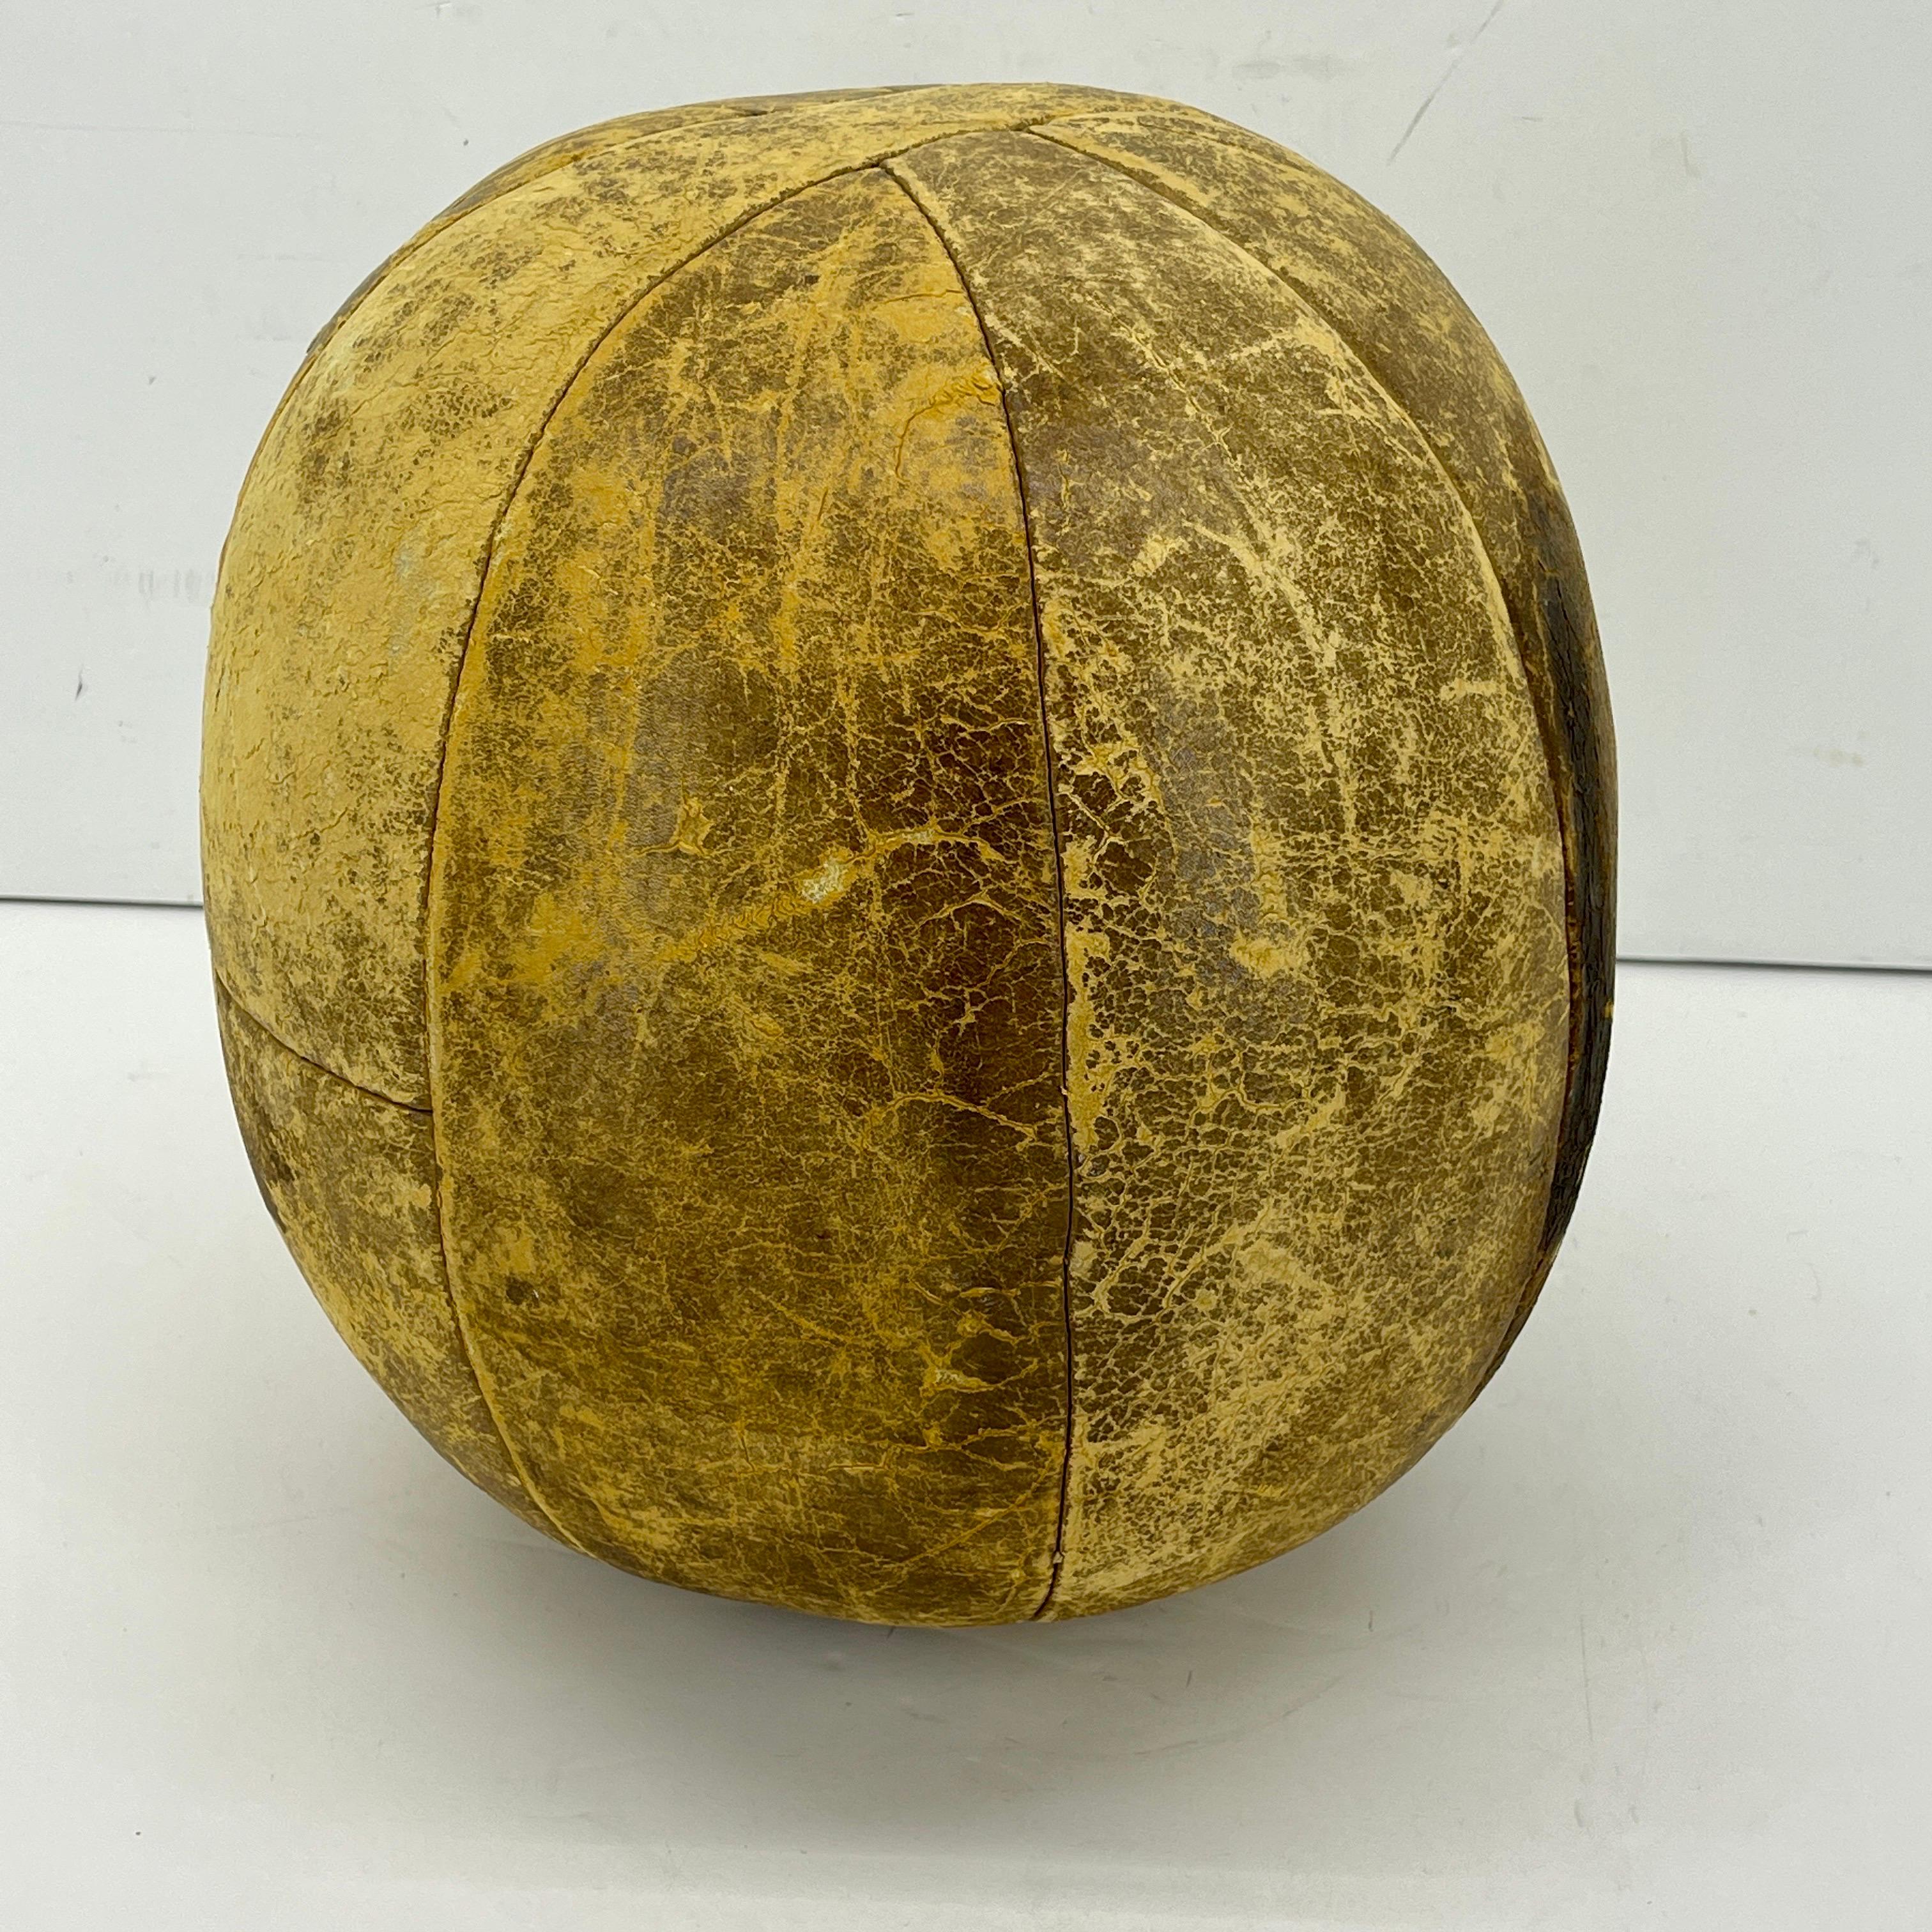 Vintage MacGregor Goldsmith 9 LB Leather Medicine Ball, 1940s In Good Condition For Sale In Haddonfield, NJ